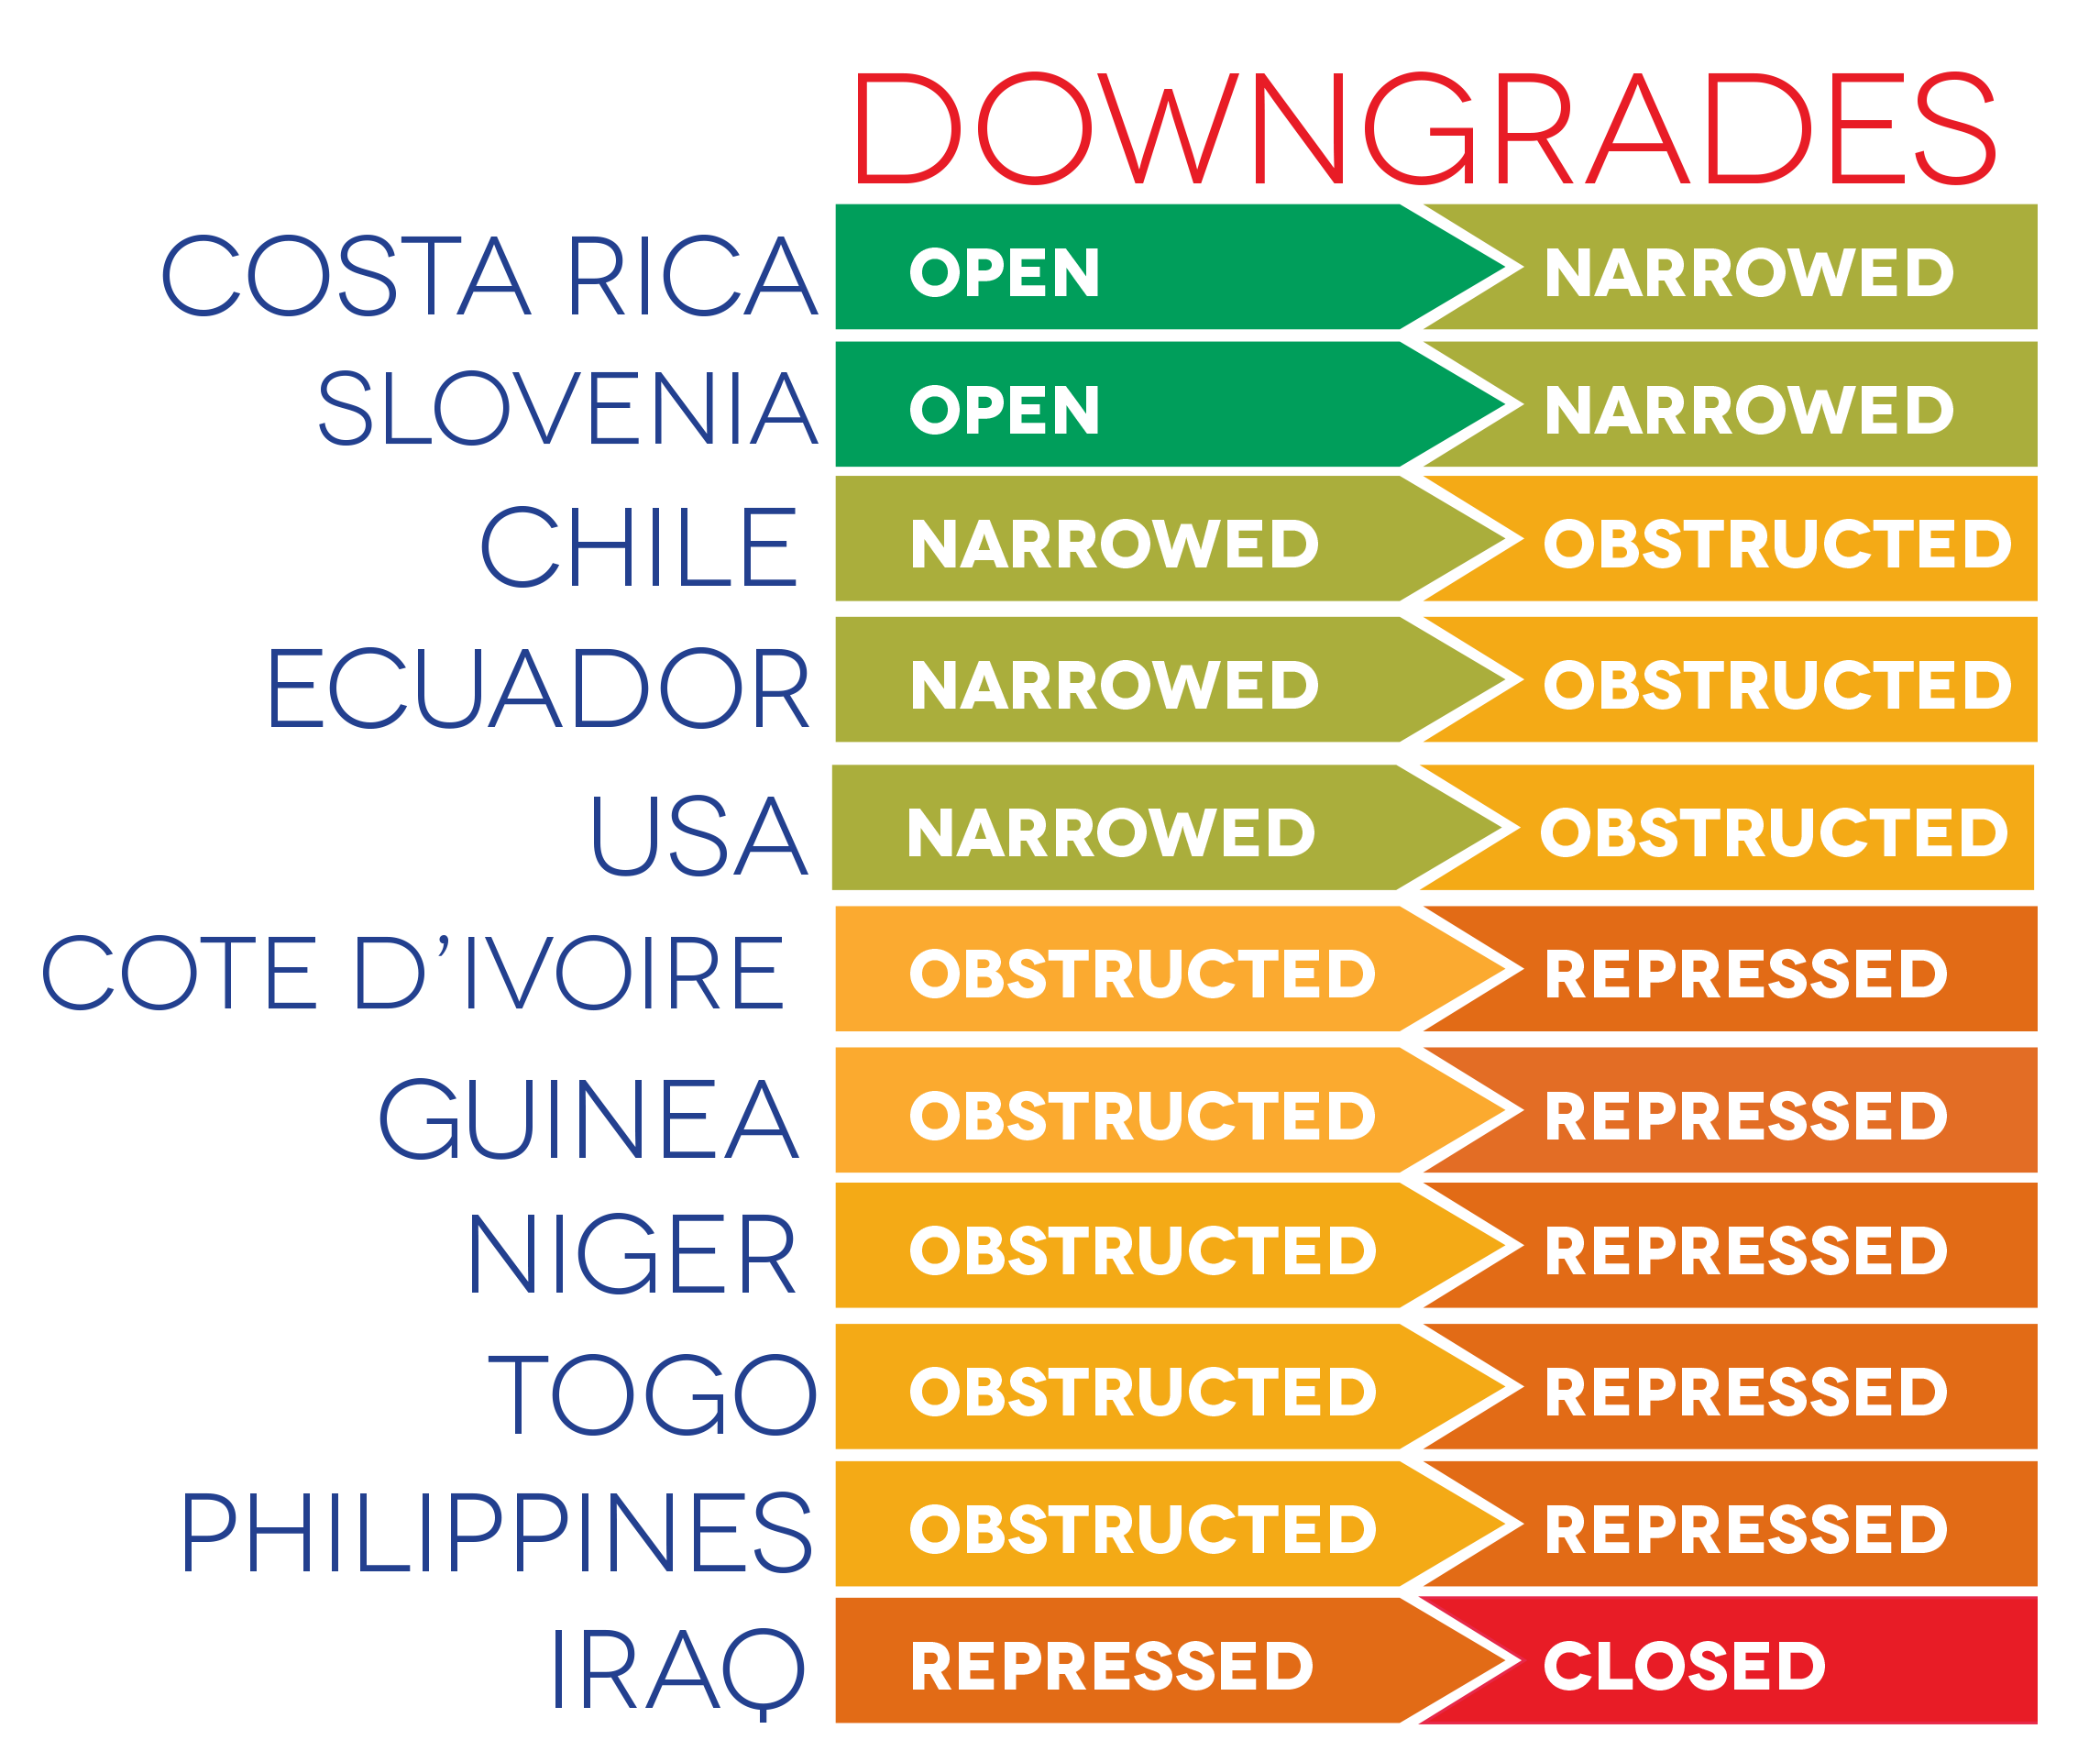 infographic - downgraded ratings